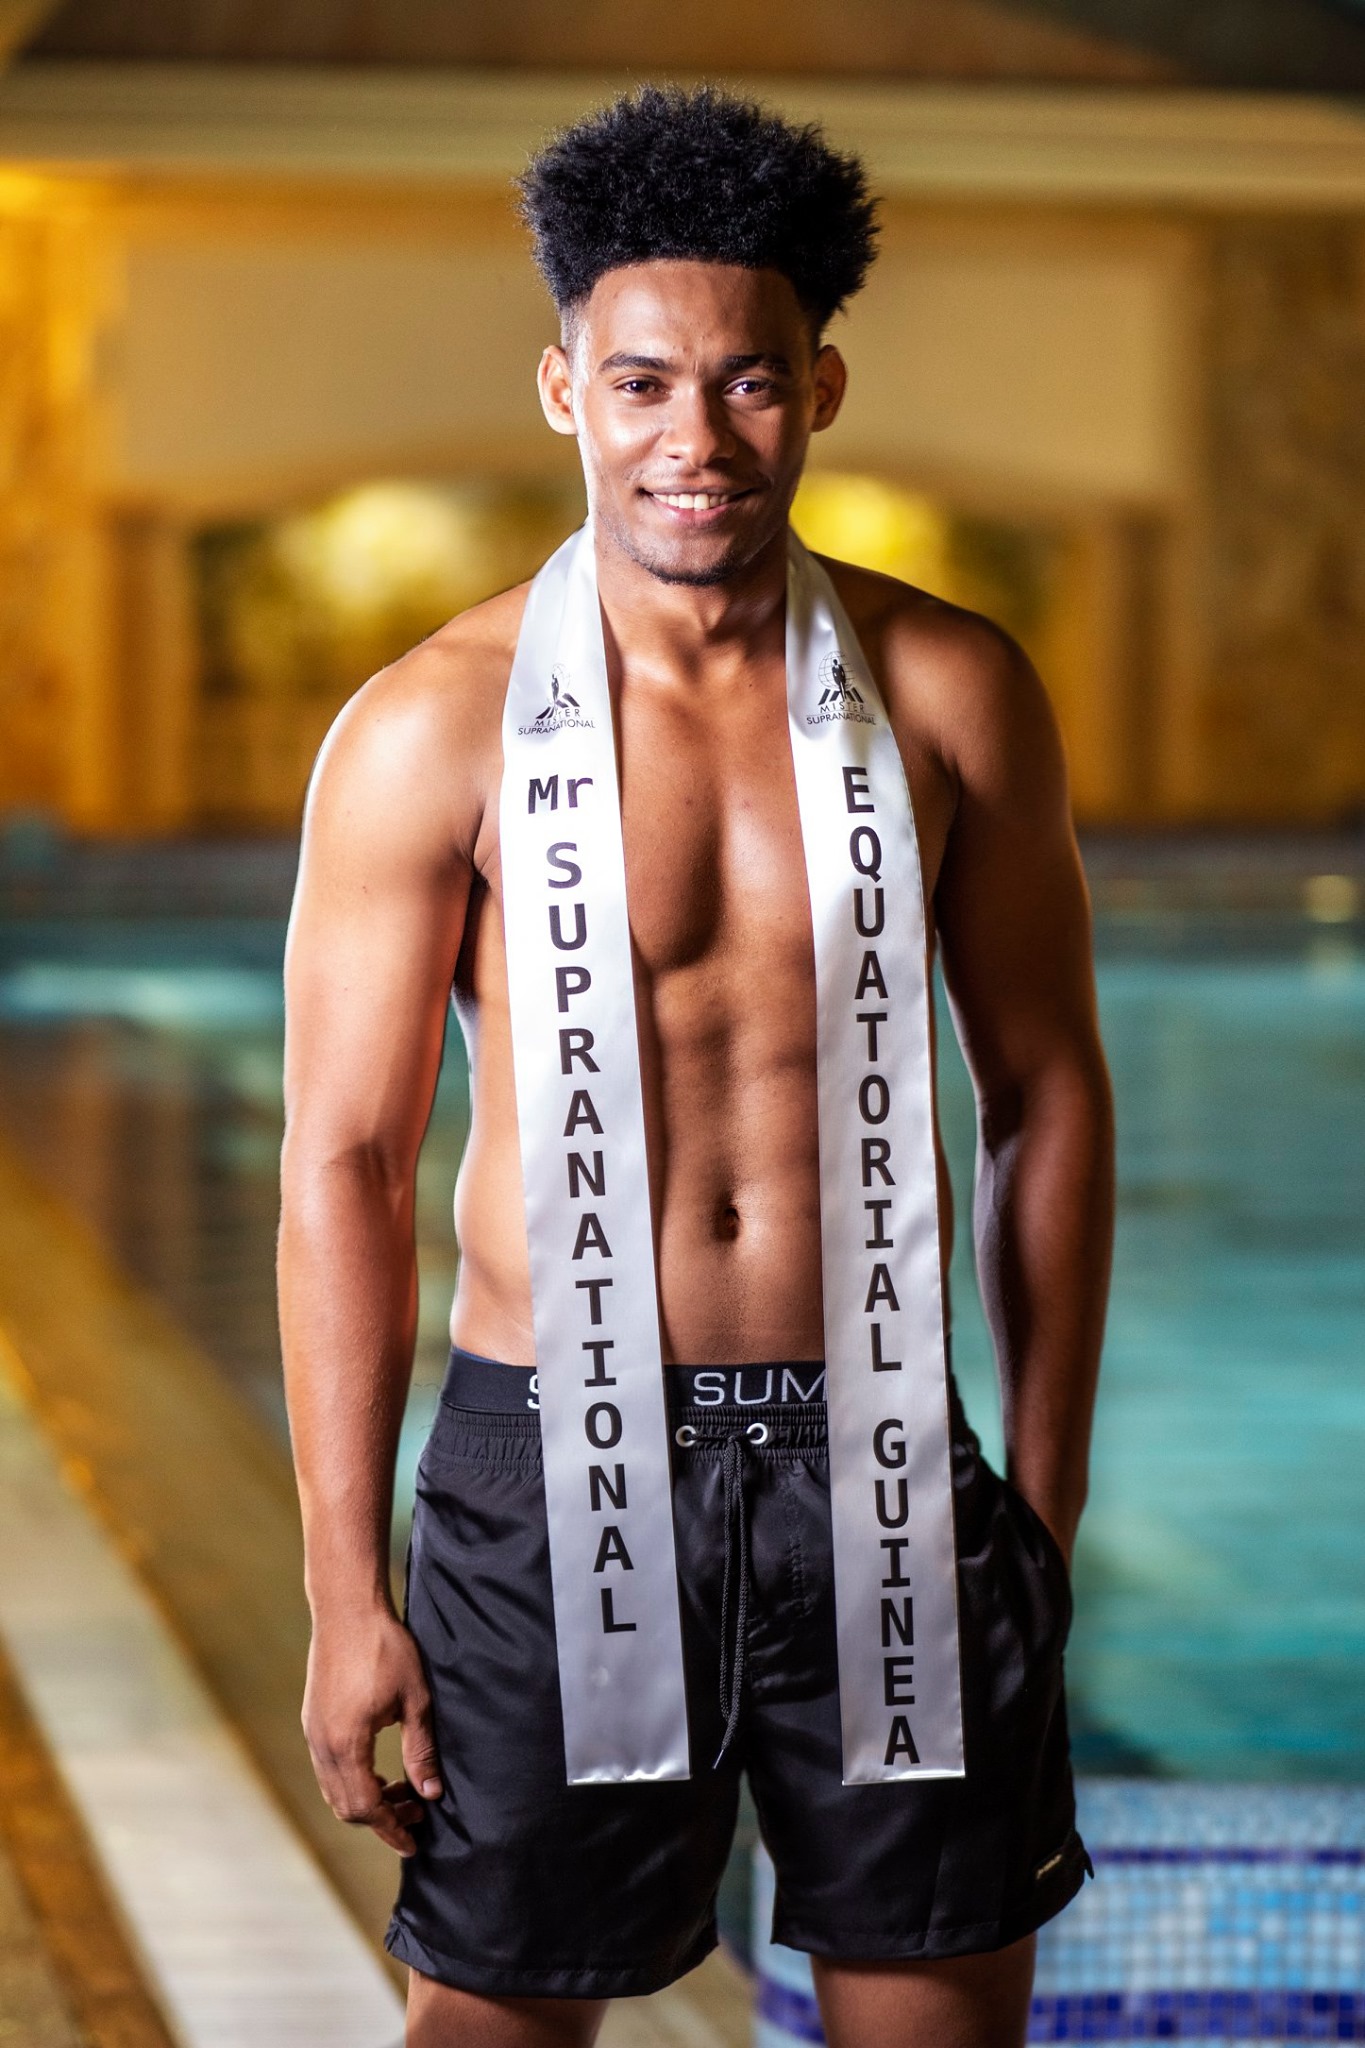 Mister Supranational 2019 Official Swimwear 00012